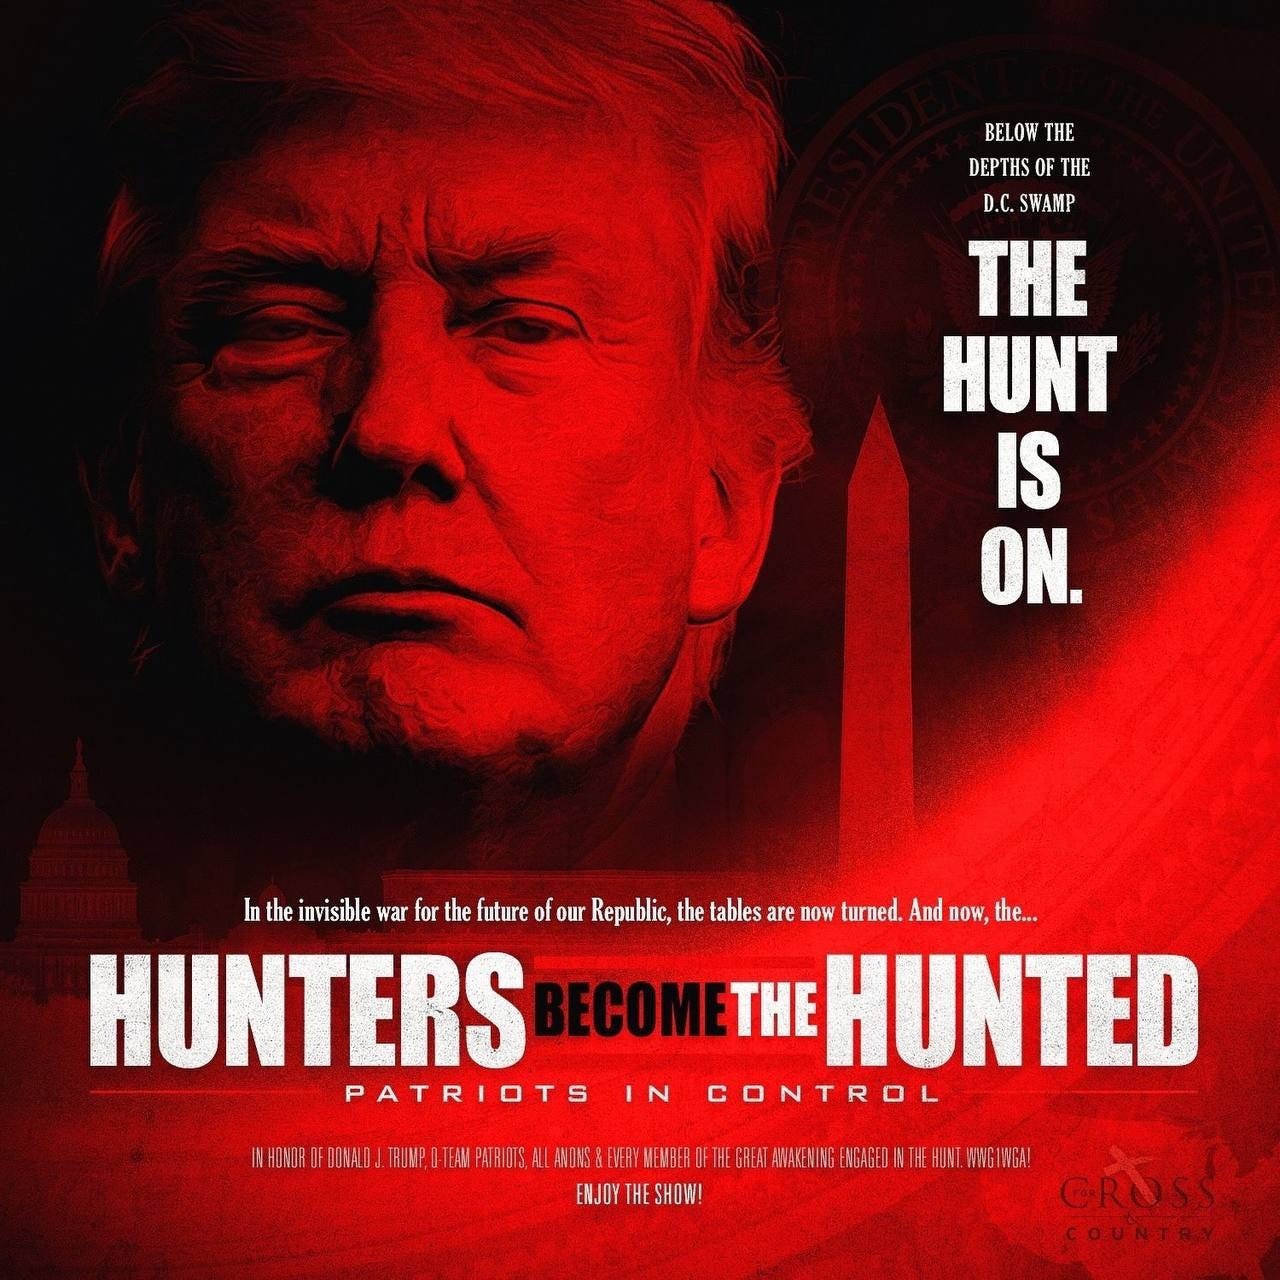 BELOW THE 
DEPTHS OF THE 
D.C. SWAMP 
THE 
HUNT 
In the invisil)le war for the future of our Republic, the tables are now turned. And now, the... 
HUNTERS 
ECOM 
PATRIOTS IN CONTROL 
IN J PATRIOTS, All & MEMBER GREAT AWAKENING ENGAGE] IN IHE 
ENJOY THE SHOW! 